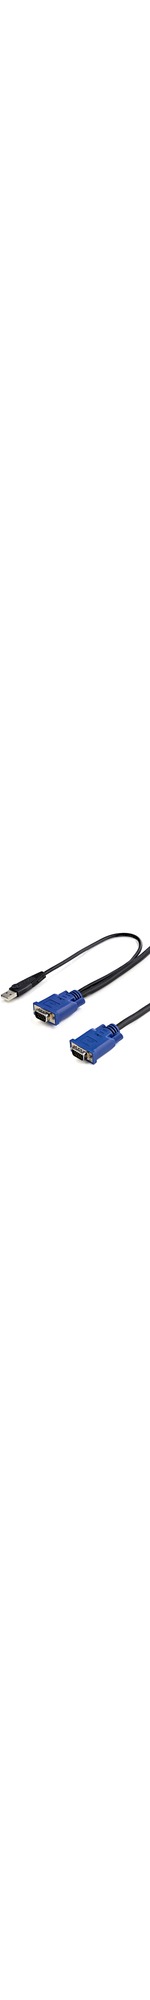 StarTech.com 15 ft 2-in-1 Ultra Thin USB KVM Cable - Black